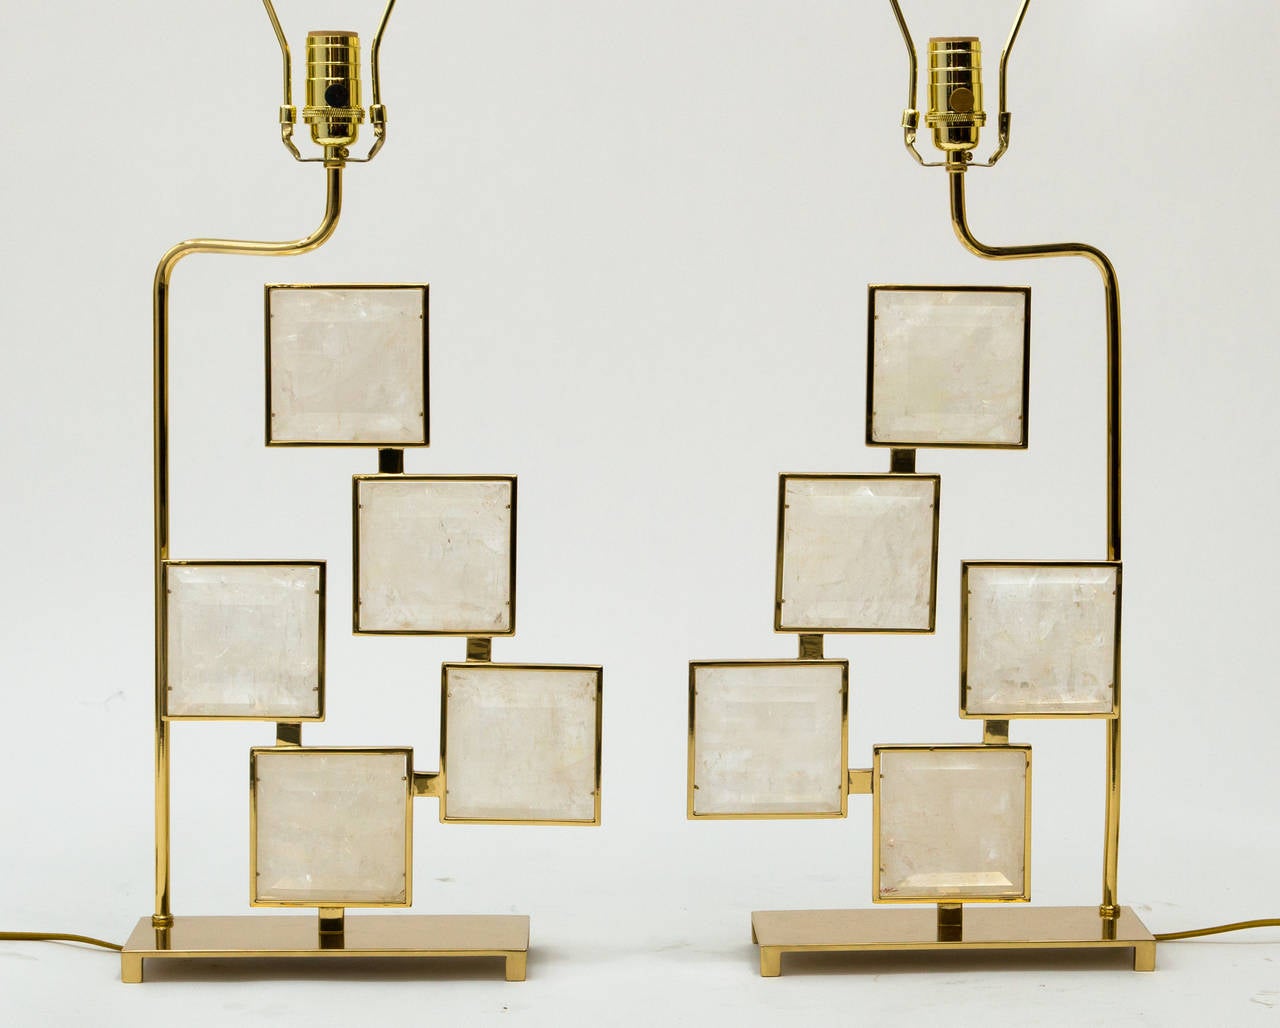 Beautiful faceted crystal and brass lamps.
One of a kind. First pair of a limited edition.
Signed by the artist.
Capacity: One E26 three-way.